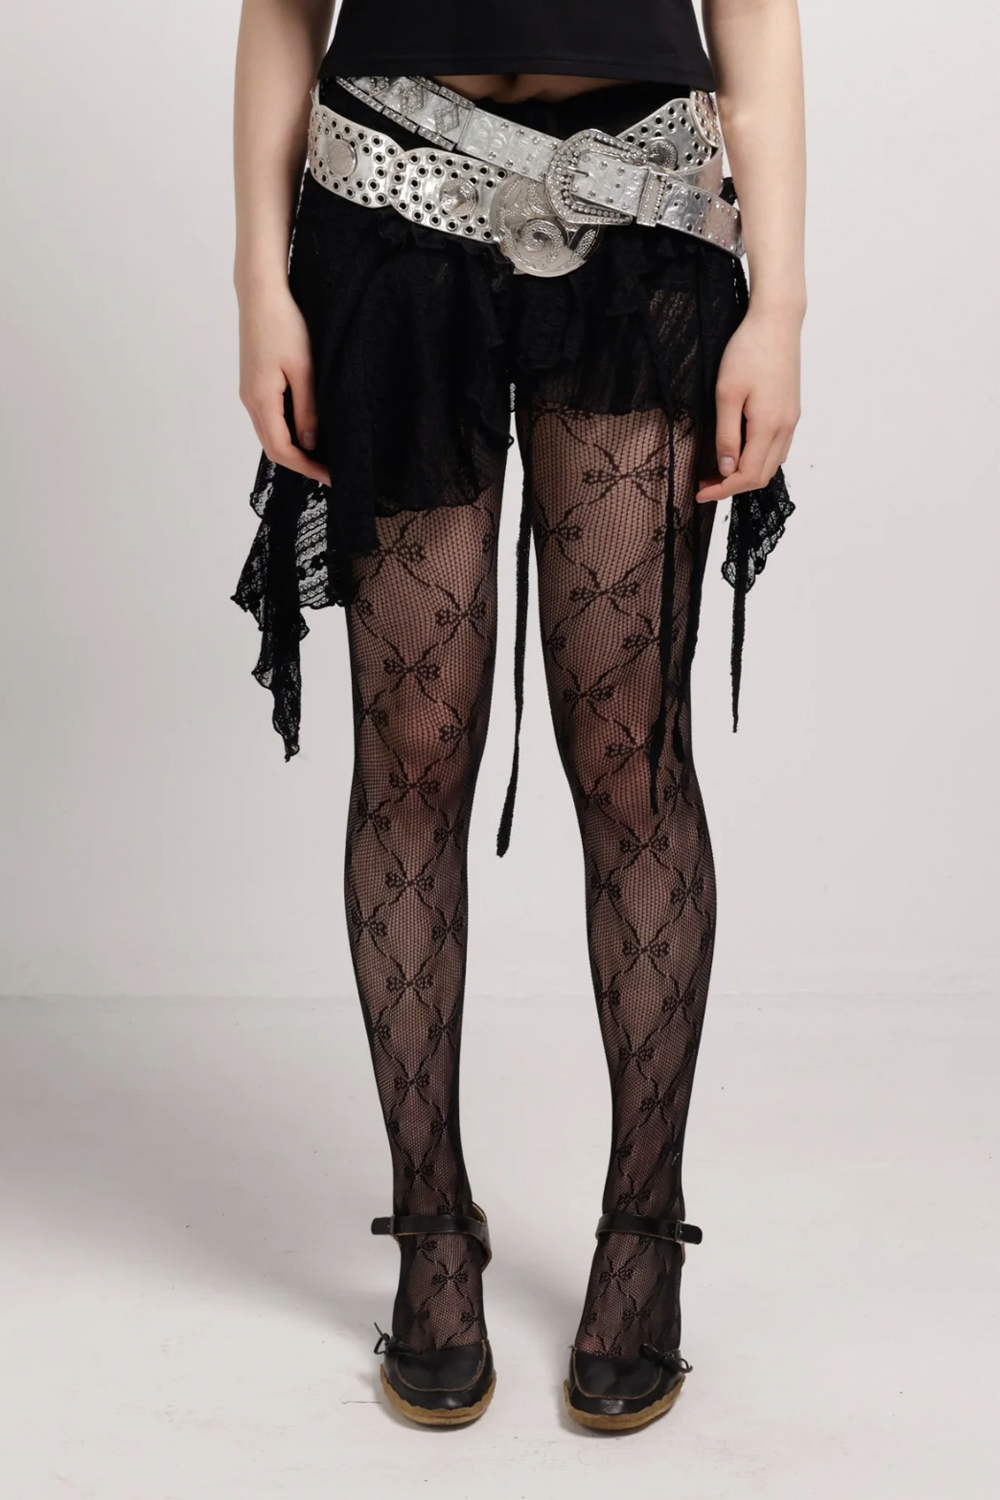 LACE ME UP TIGHTS